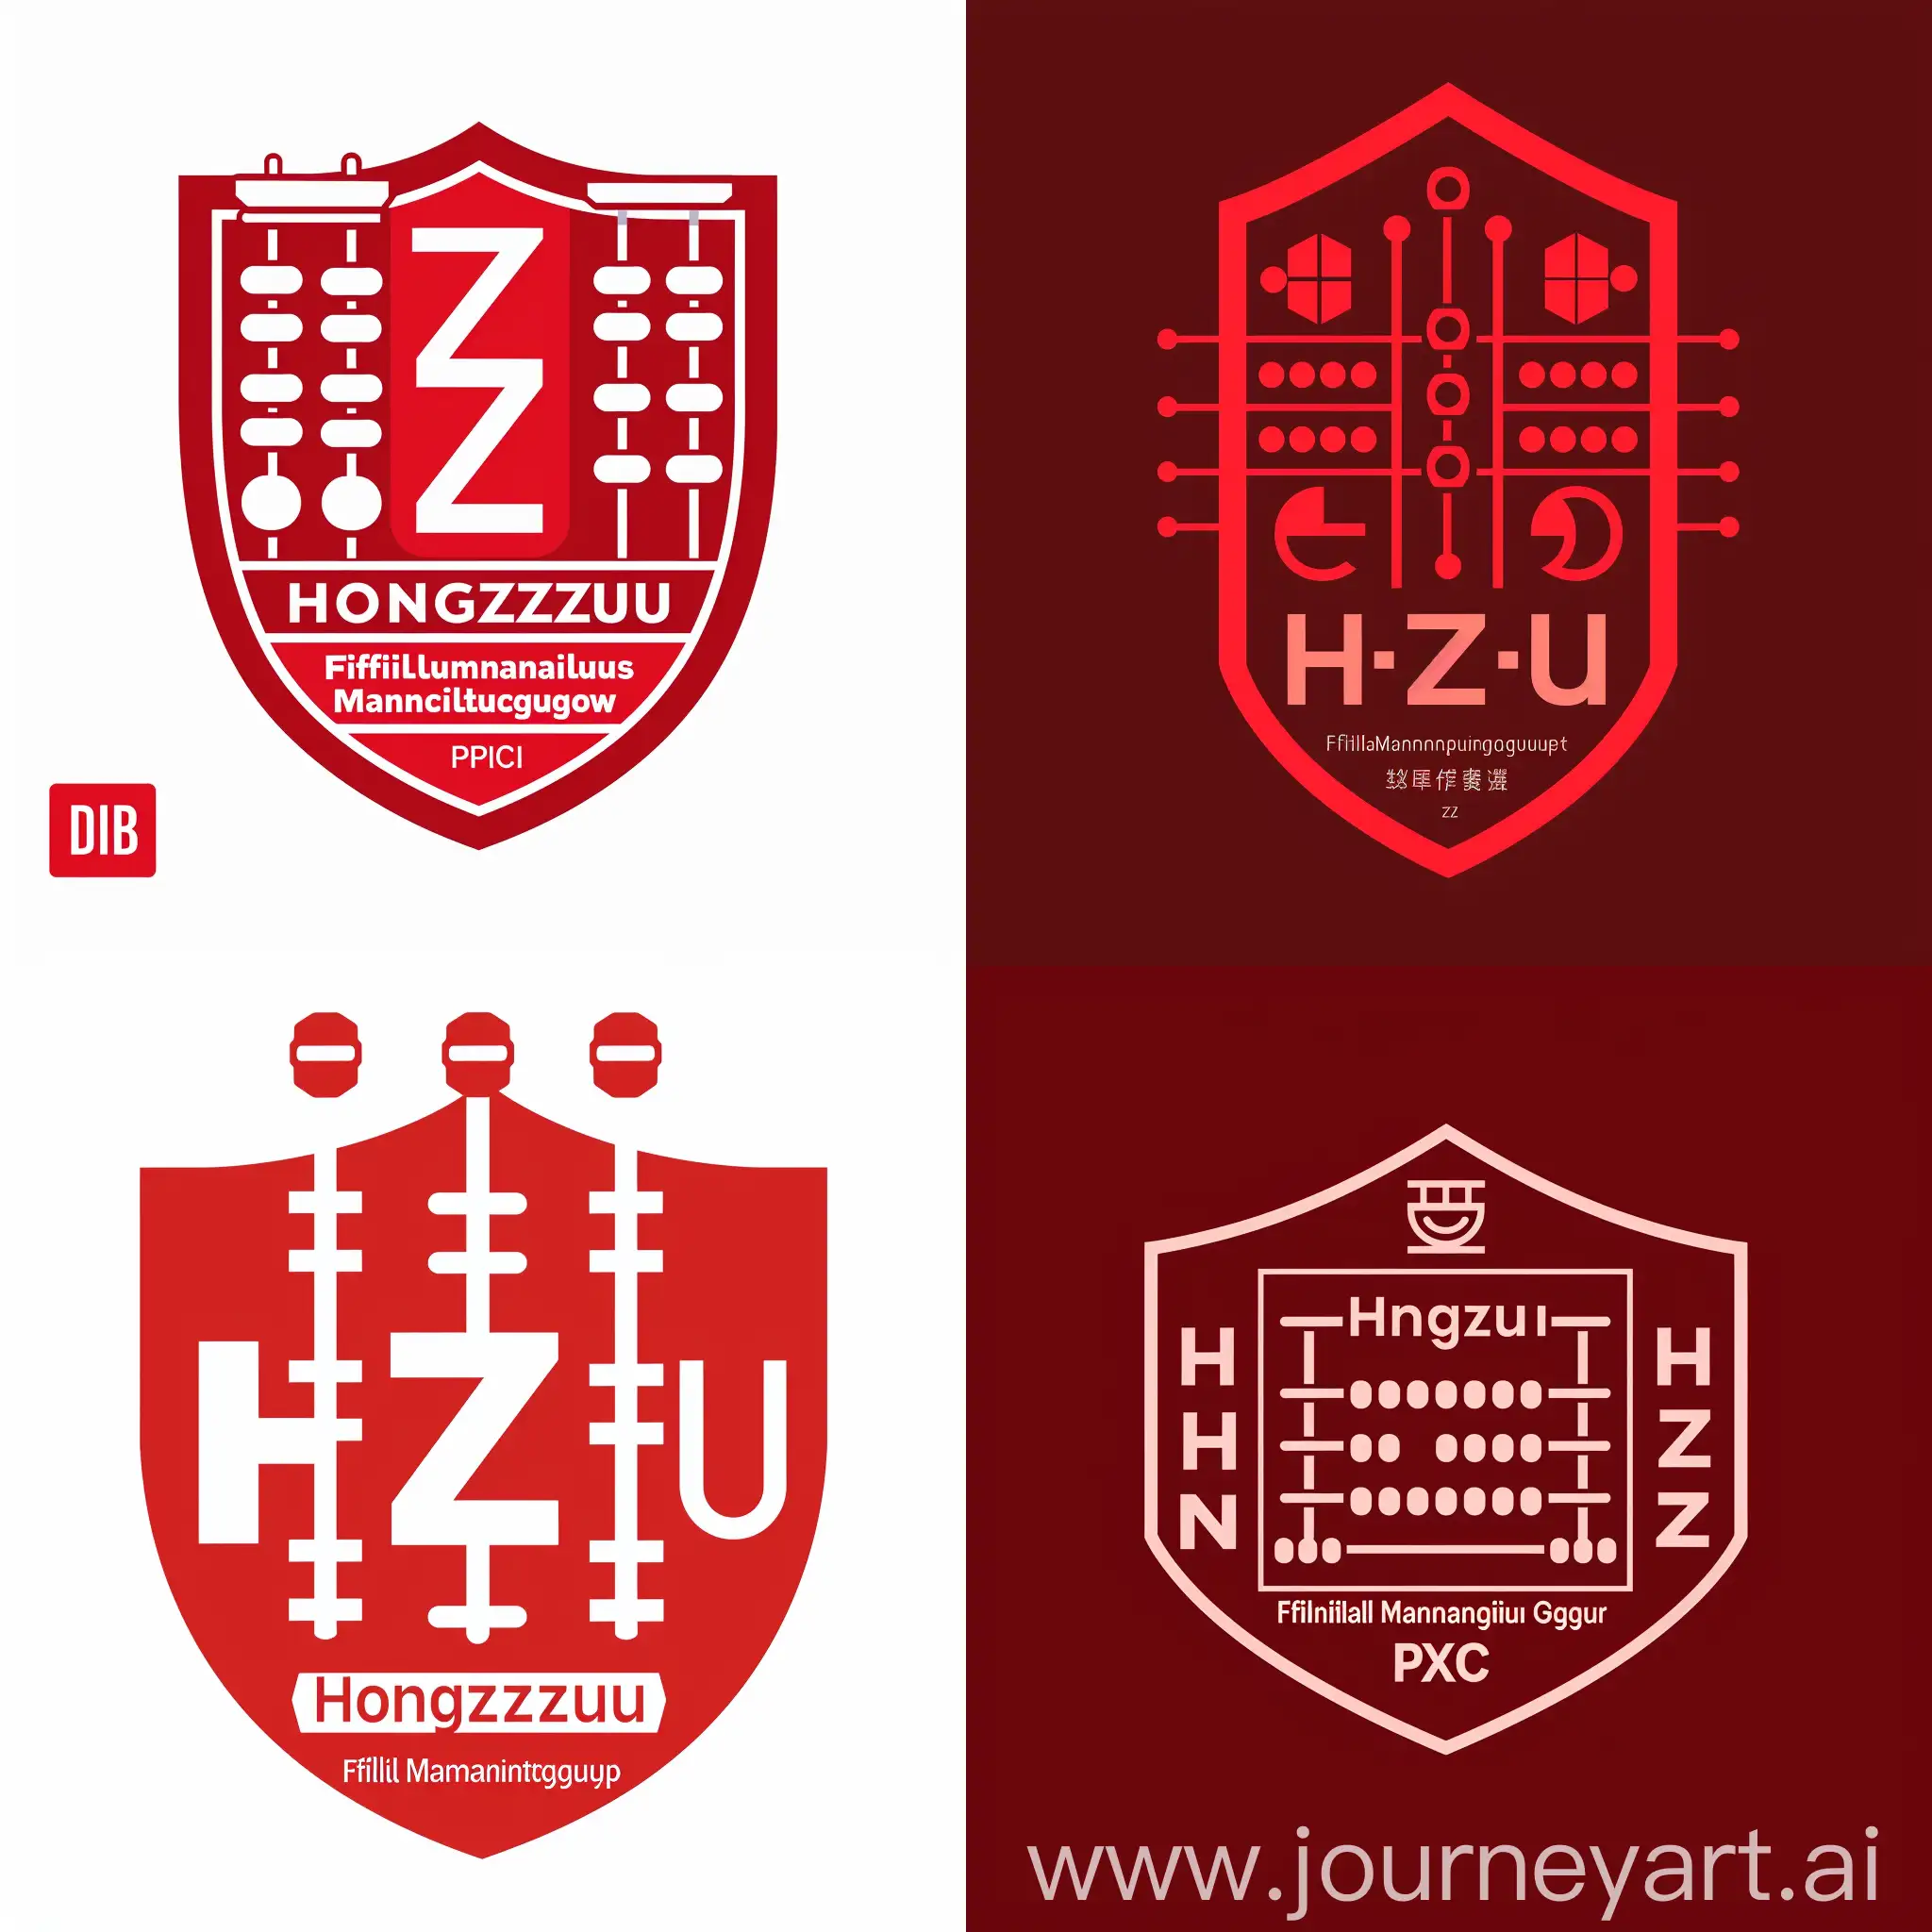 **Description**: Create a minimalist logo image representing the concept of business-finance integration, featuring the iconic imagery of the "Hongzhu" brand. Incorporate variations and blending of the letters "H" and "Z" along with accounting and abacus motifs, all in a shield or insignia style. Additionally, include "Financial Management" in English. The logo should convey professionalism and simplicity, while incorporating financial and accounting elements. Additionally, include elements inspired by logos of international consulting firms and insignias of prestigious international universities. **Examples**: McKinsey, Deloitte, Accenture, Bain, IBM, Boston Consulting Group. **Constraints**: Use red color and keep the design minimalist. Incorporate the "hongzhu" brand. Avoid the depiction of human figures. **Preferences**: Include a shield or emblem motif. **Output Format**: PNG.